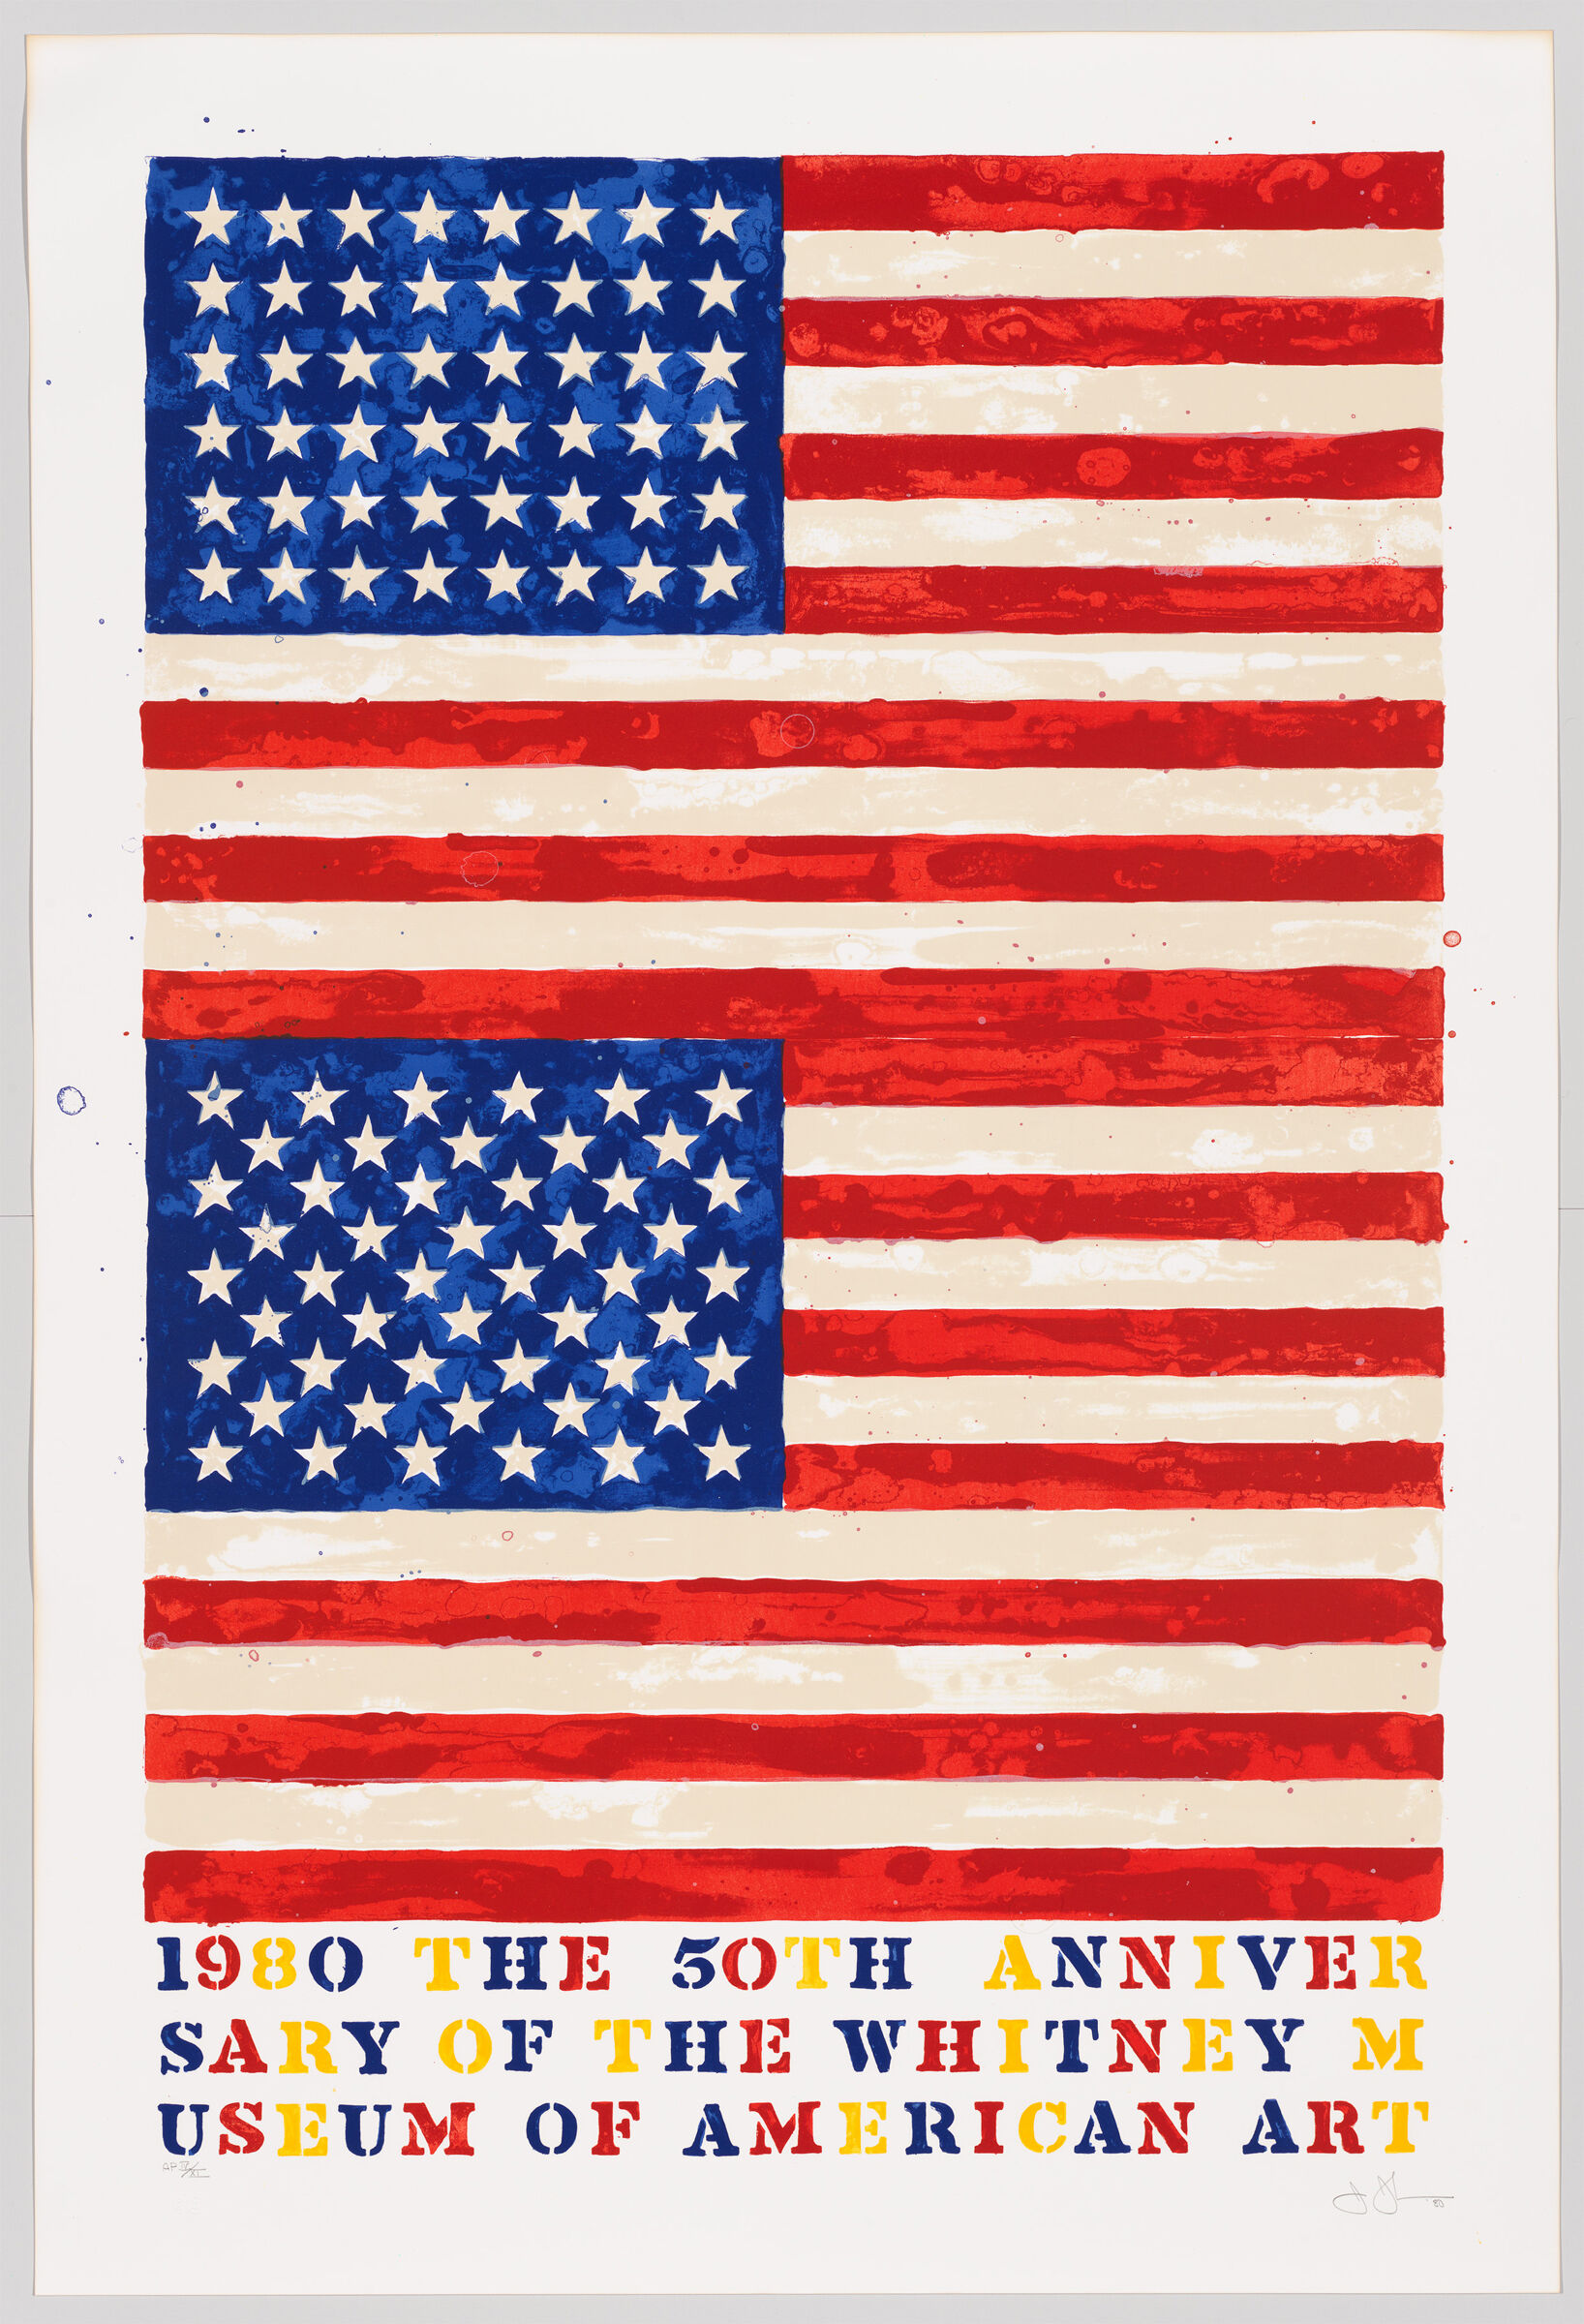 Poster of two American flags, stacked vertically, with text in red, blue, and yellow letters beneath.